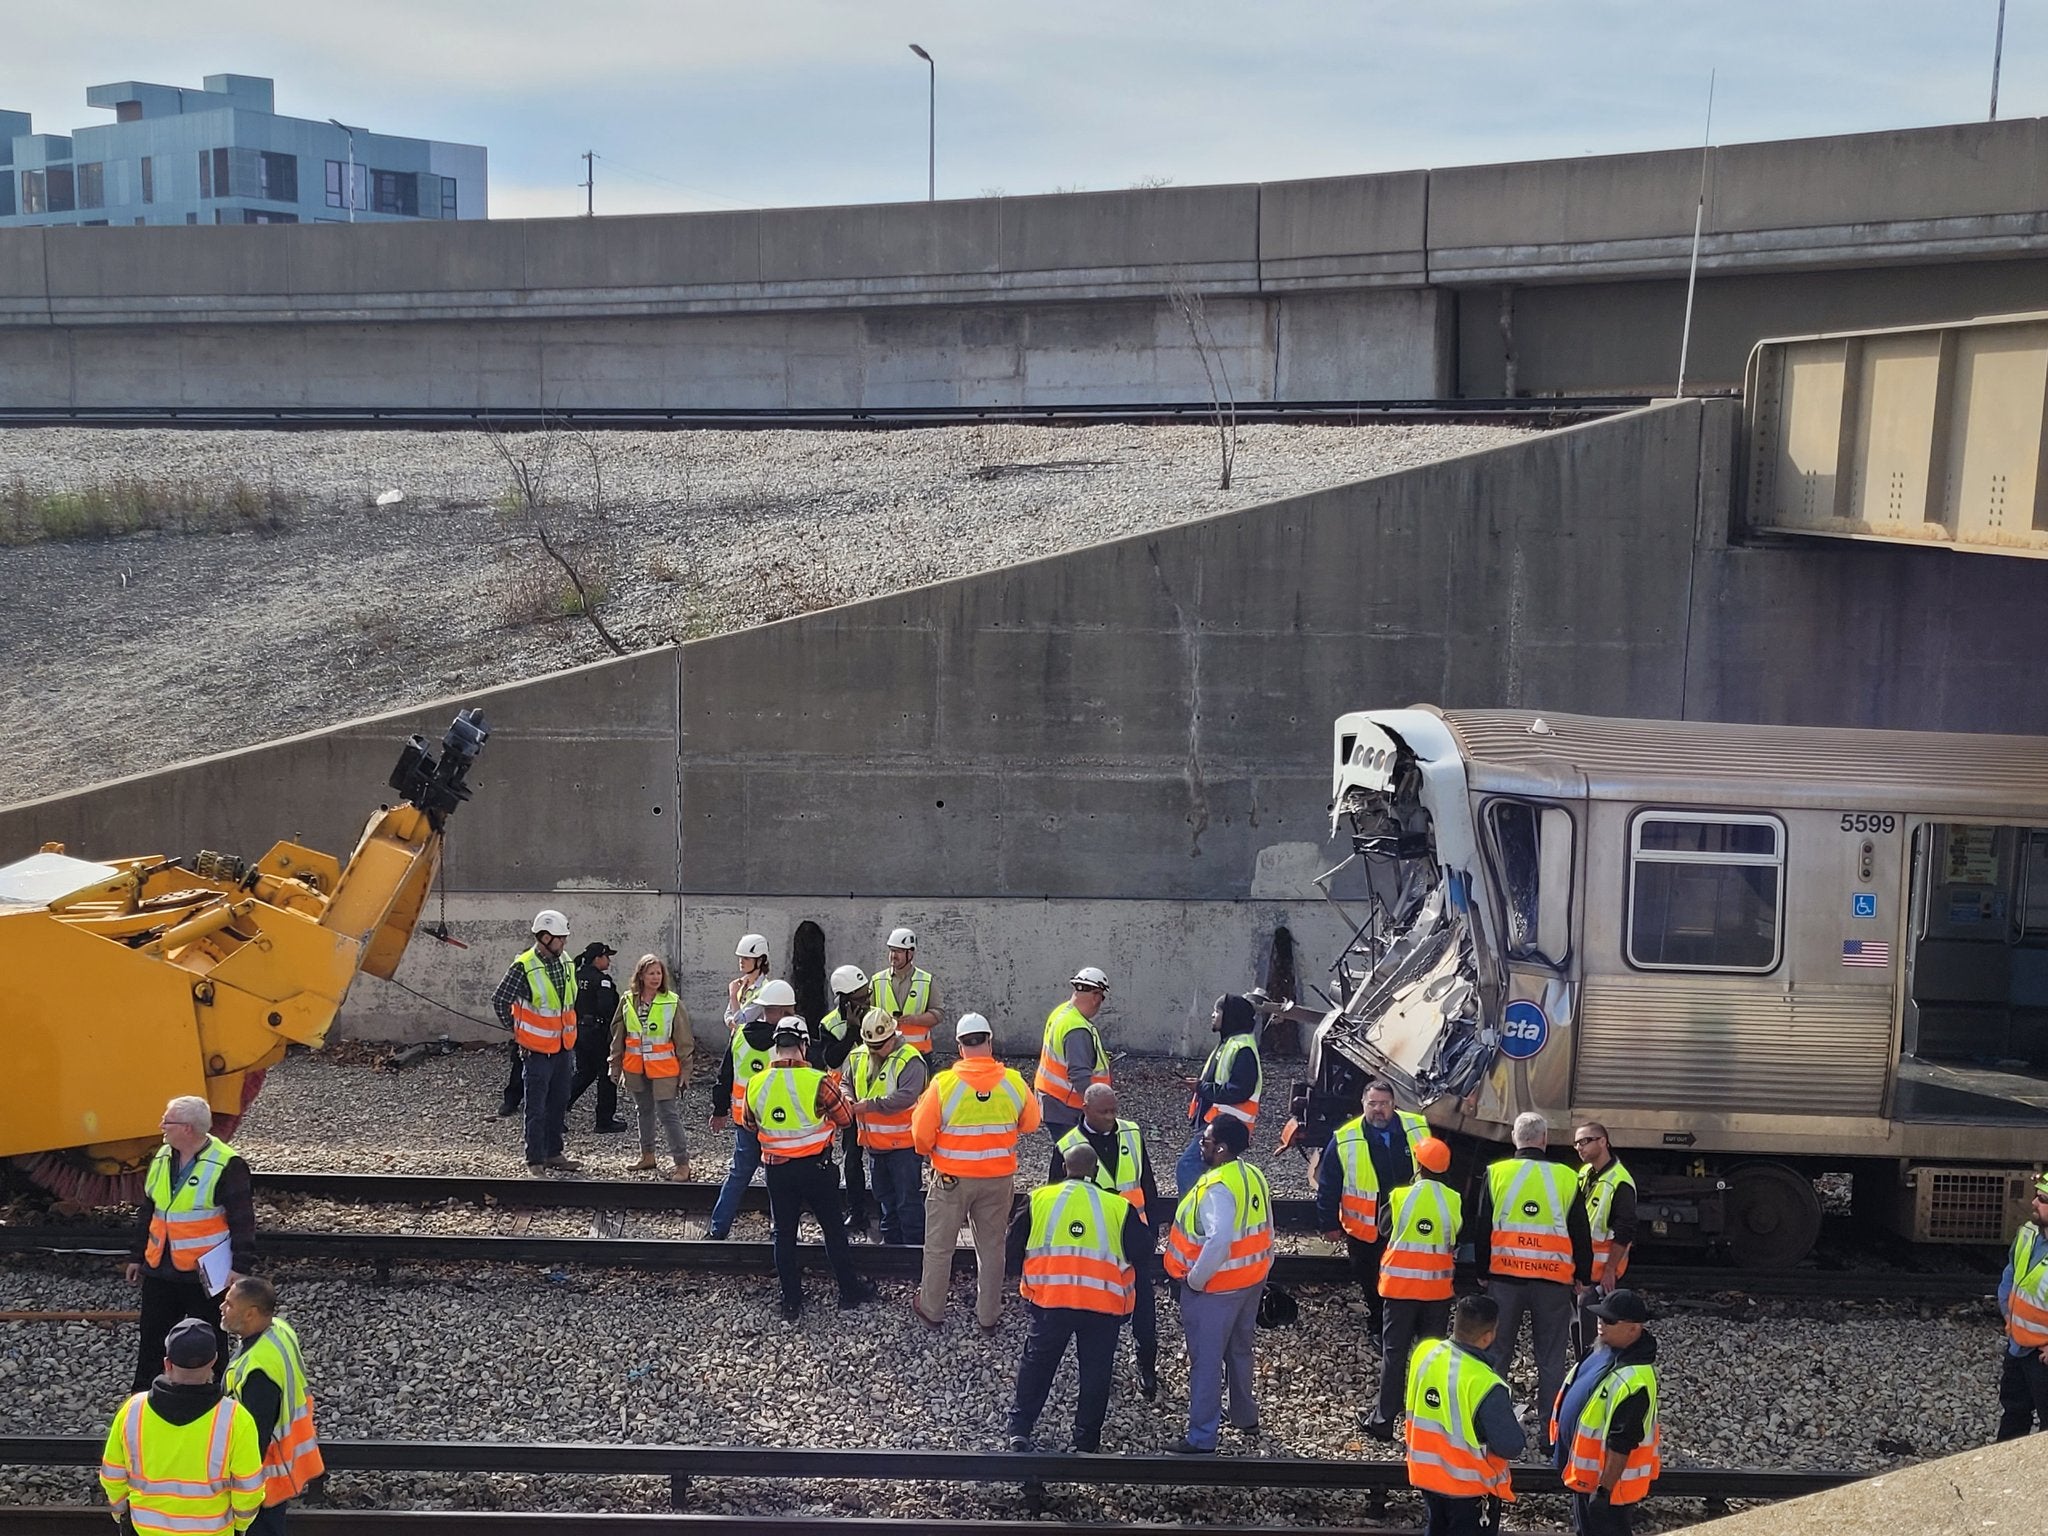 Workers examin the damage to a CTA train in Chicago, Illinois after it crashed into snow-removal equipment